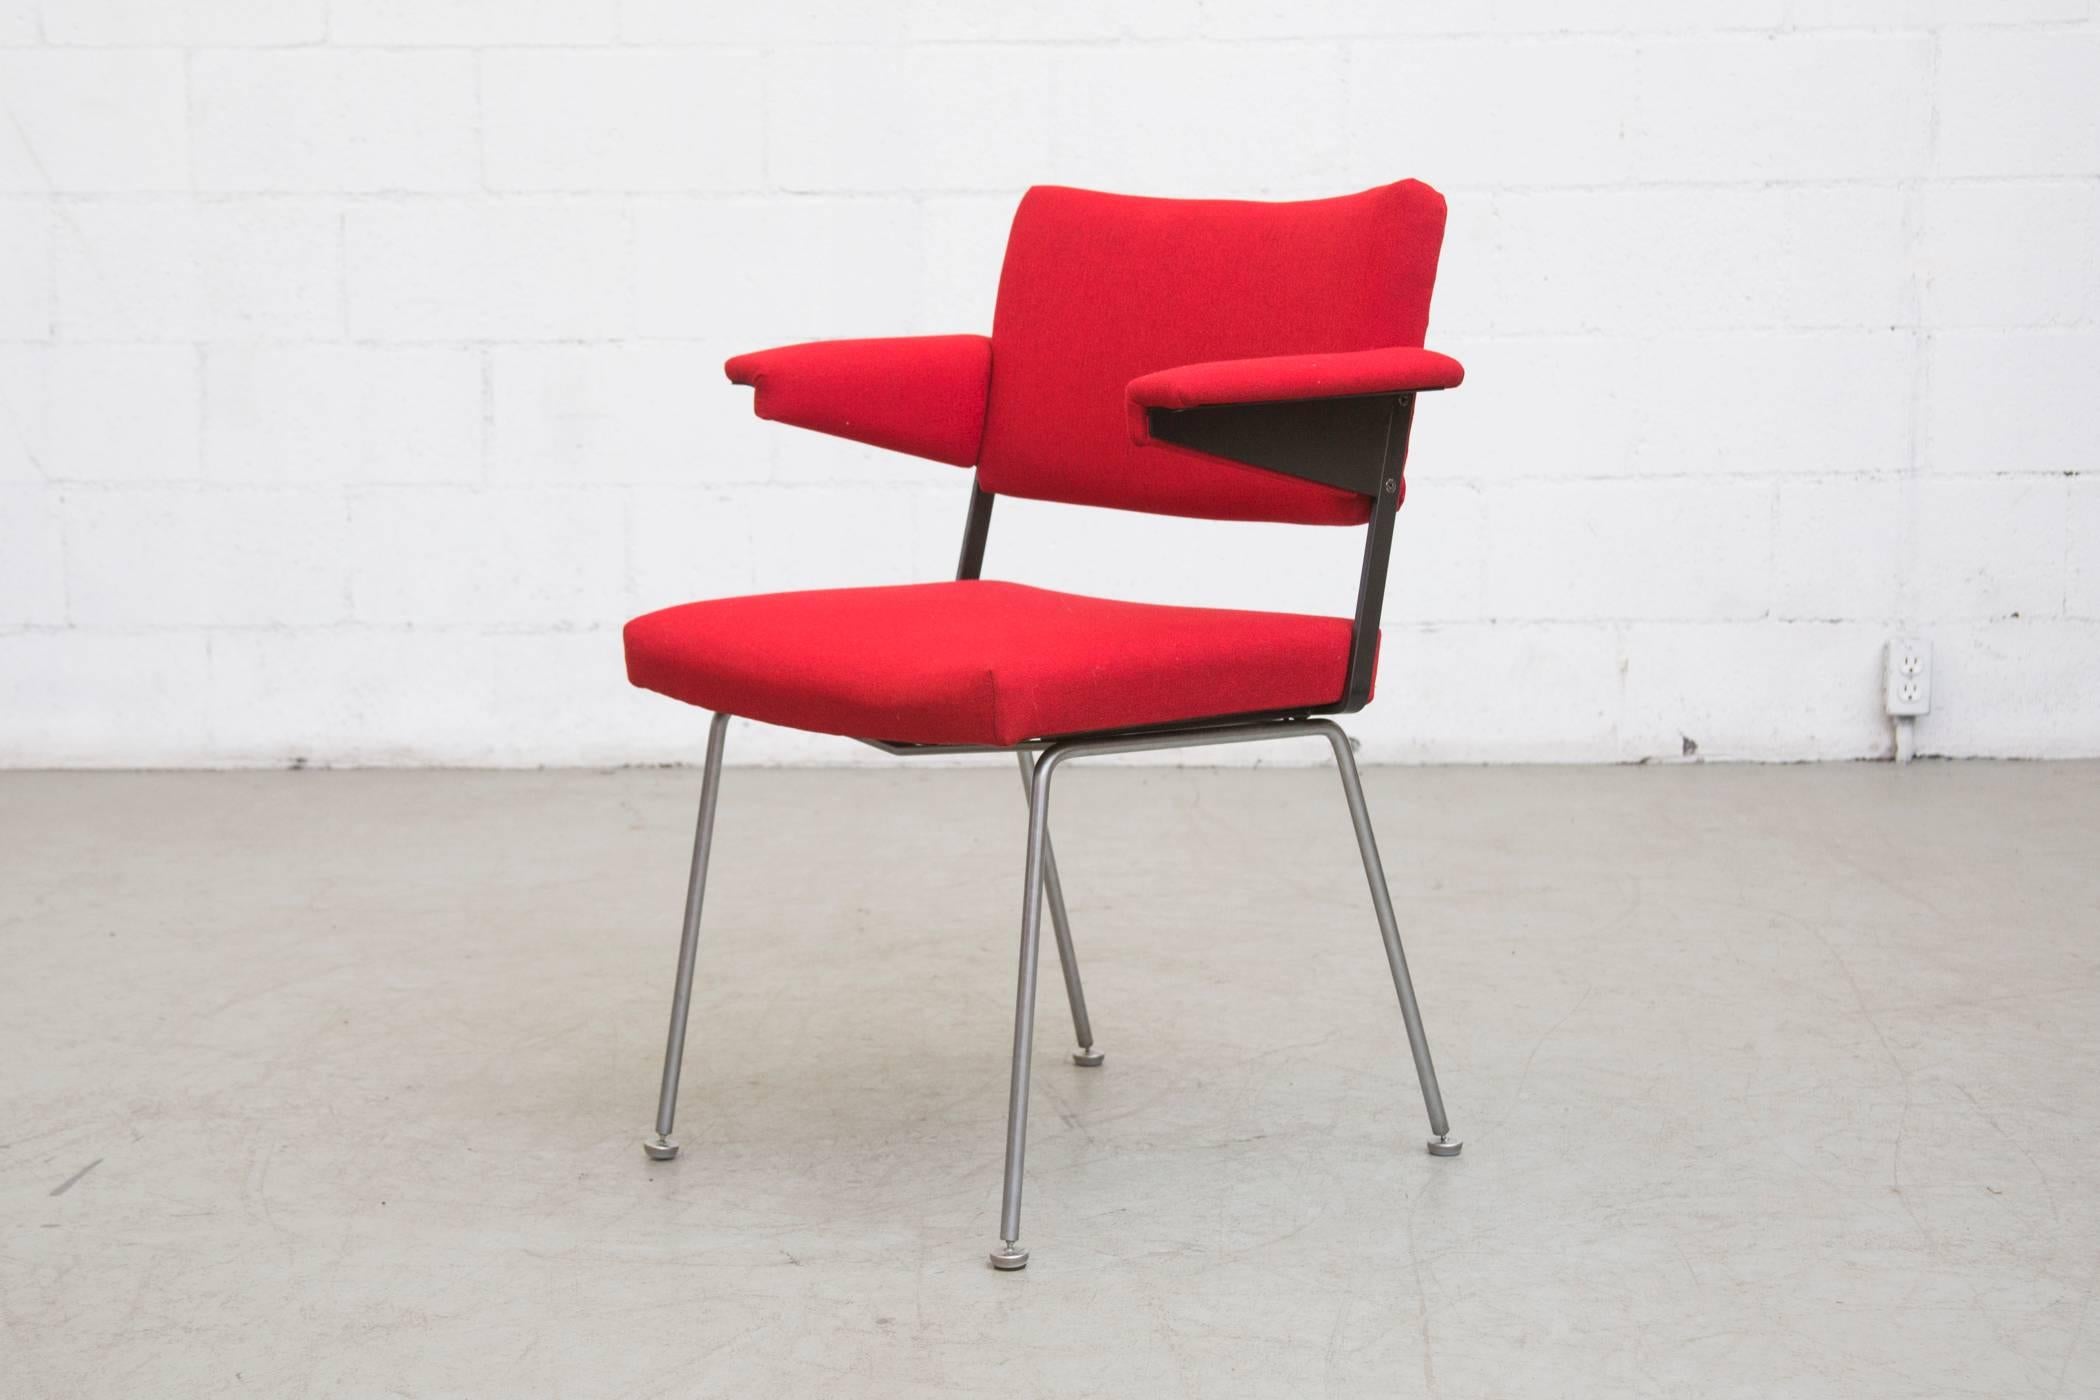 Great architectural chair in new flame red fabric with wide body, prouve style armrests, black enameled metal frame and brushed steel legs. Frame in original condition. Set price.